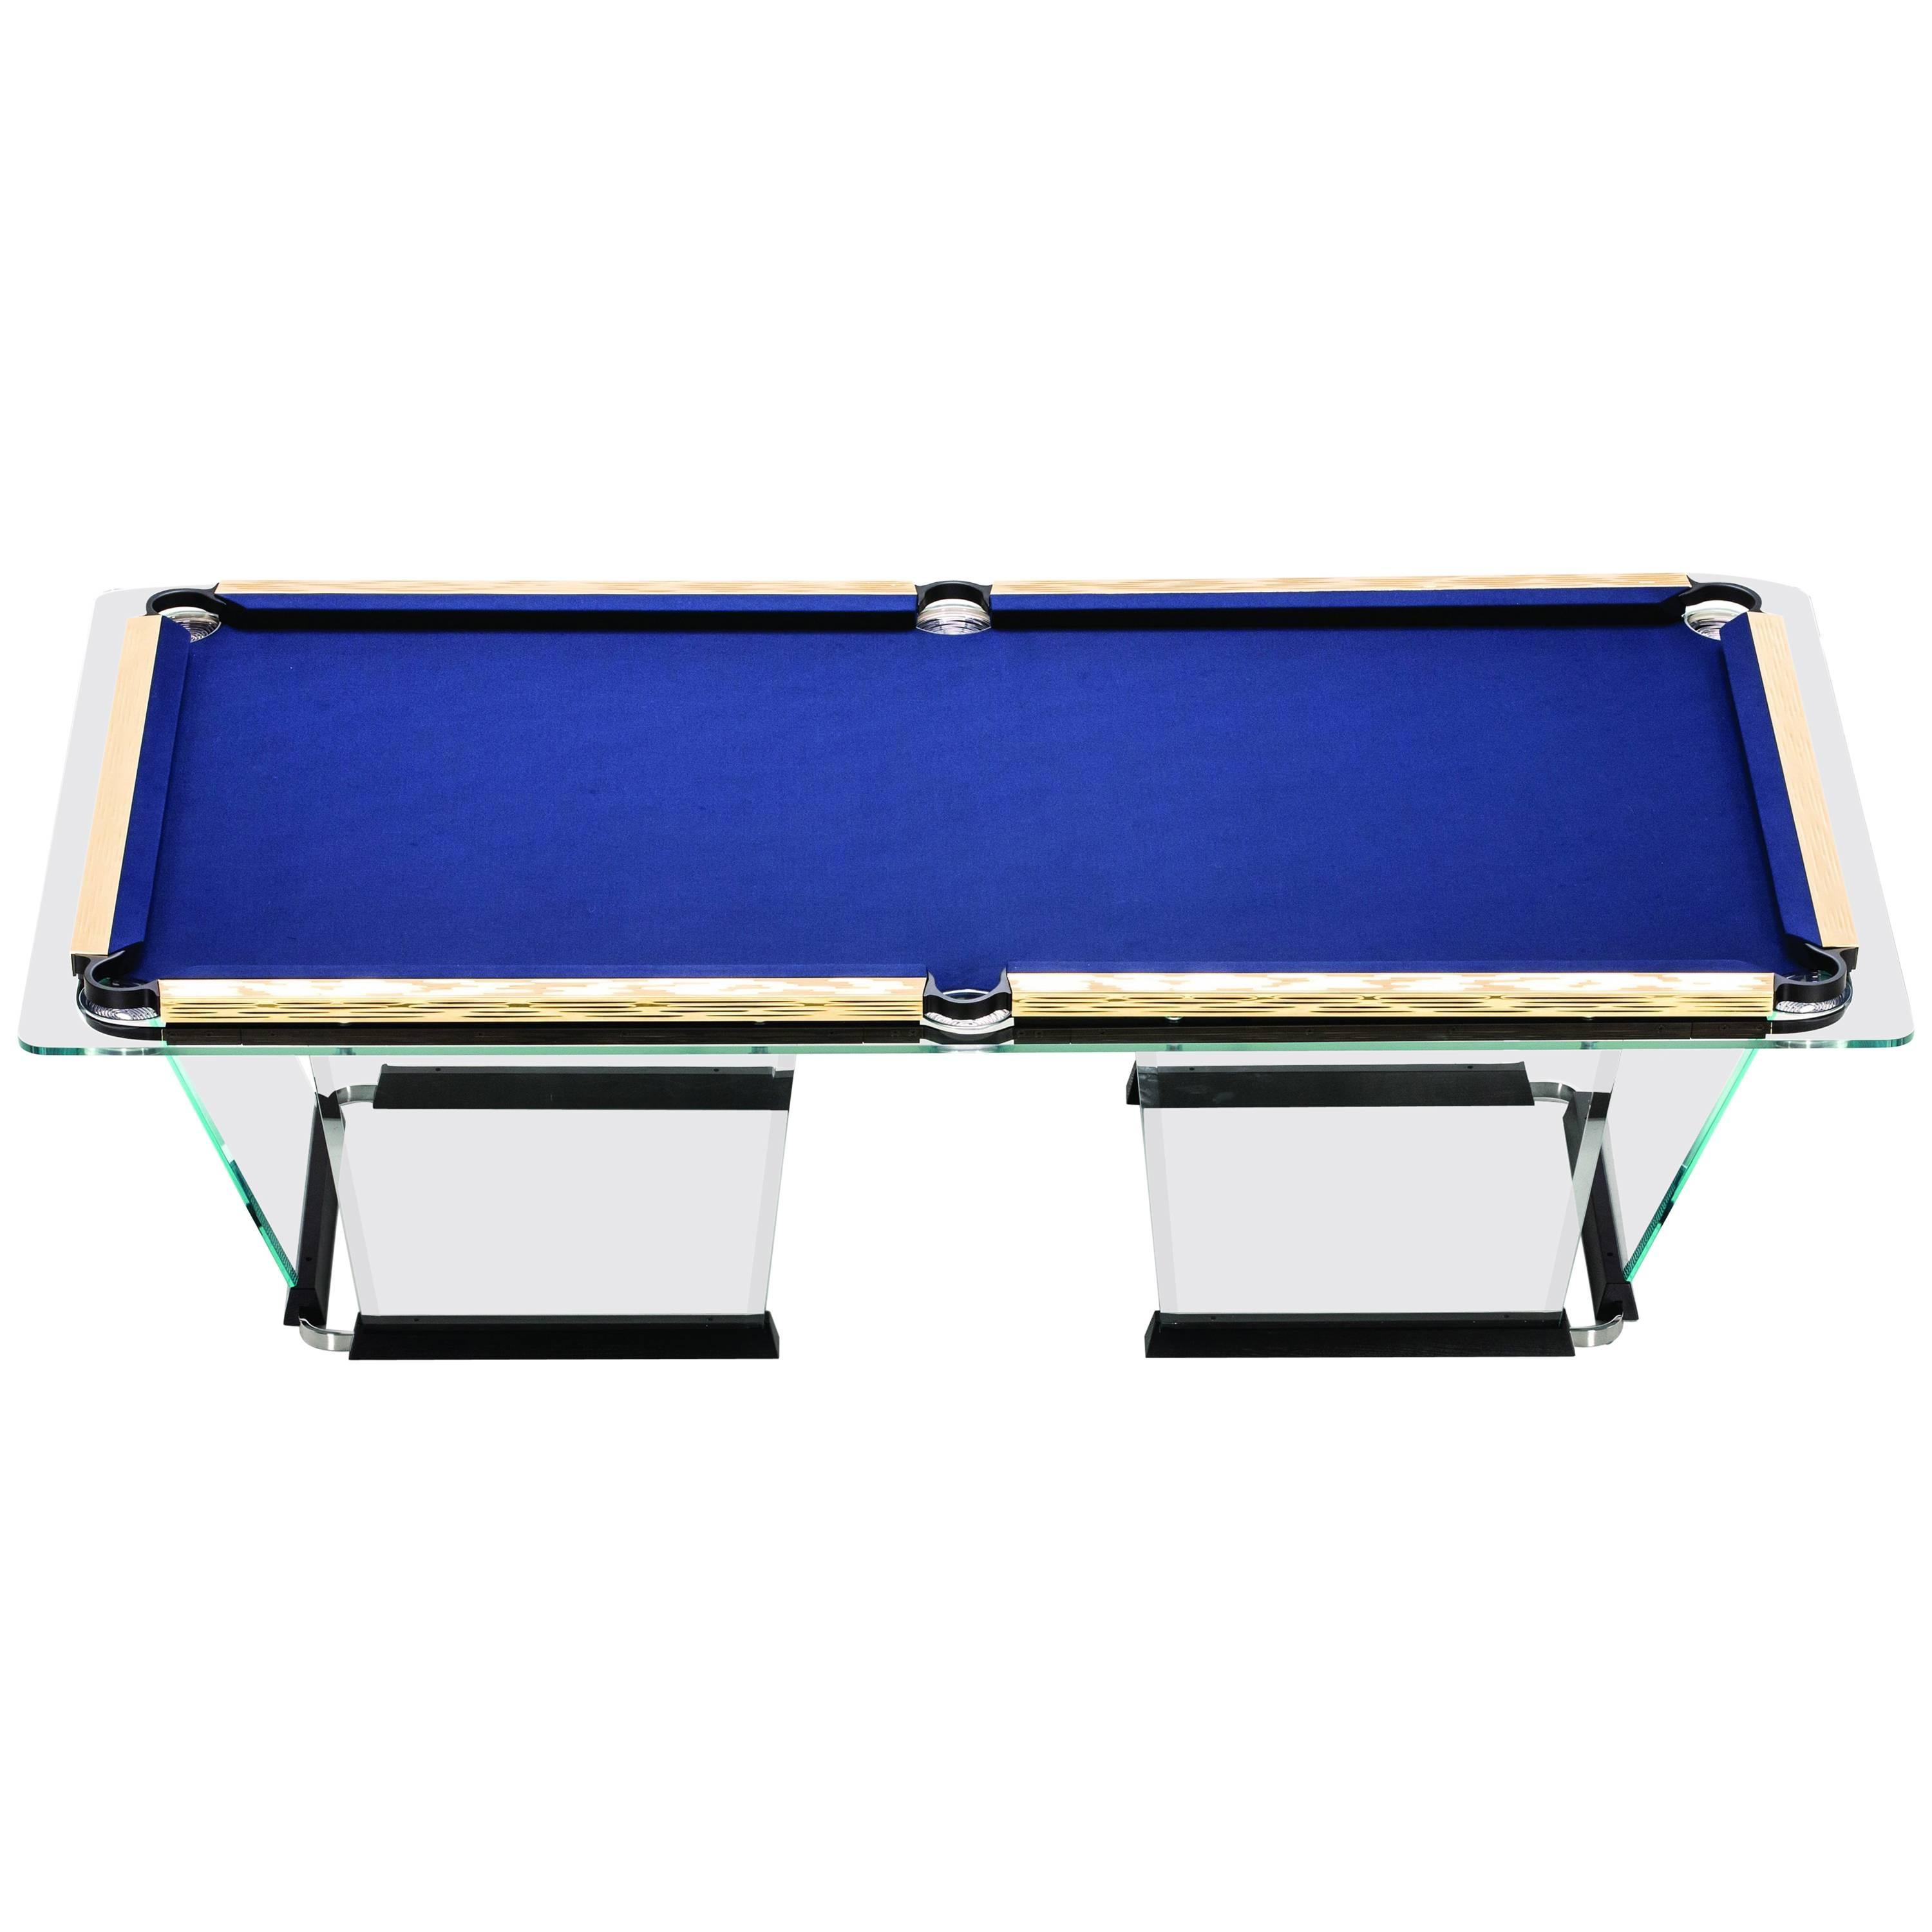 "T1.2" Crystal Pool Table with Gold Plated Covers by Marc Sadler for Teckell